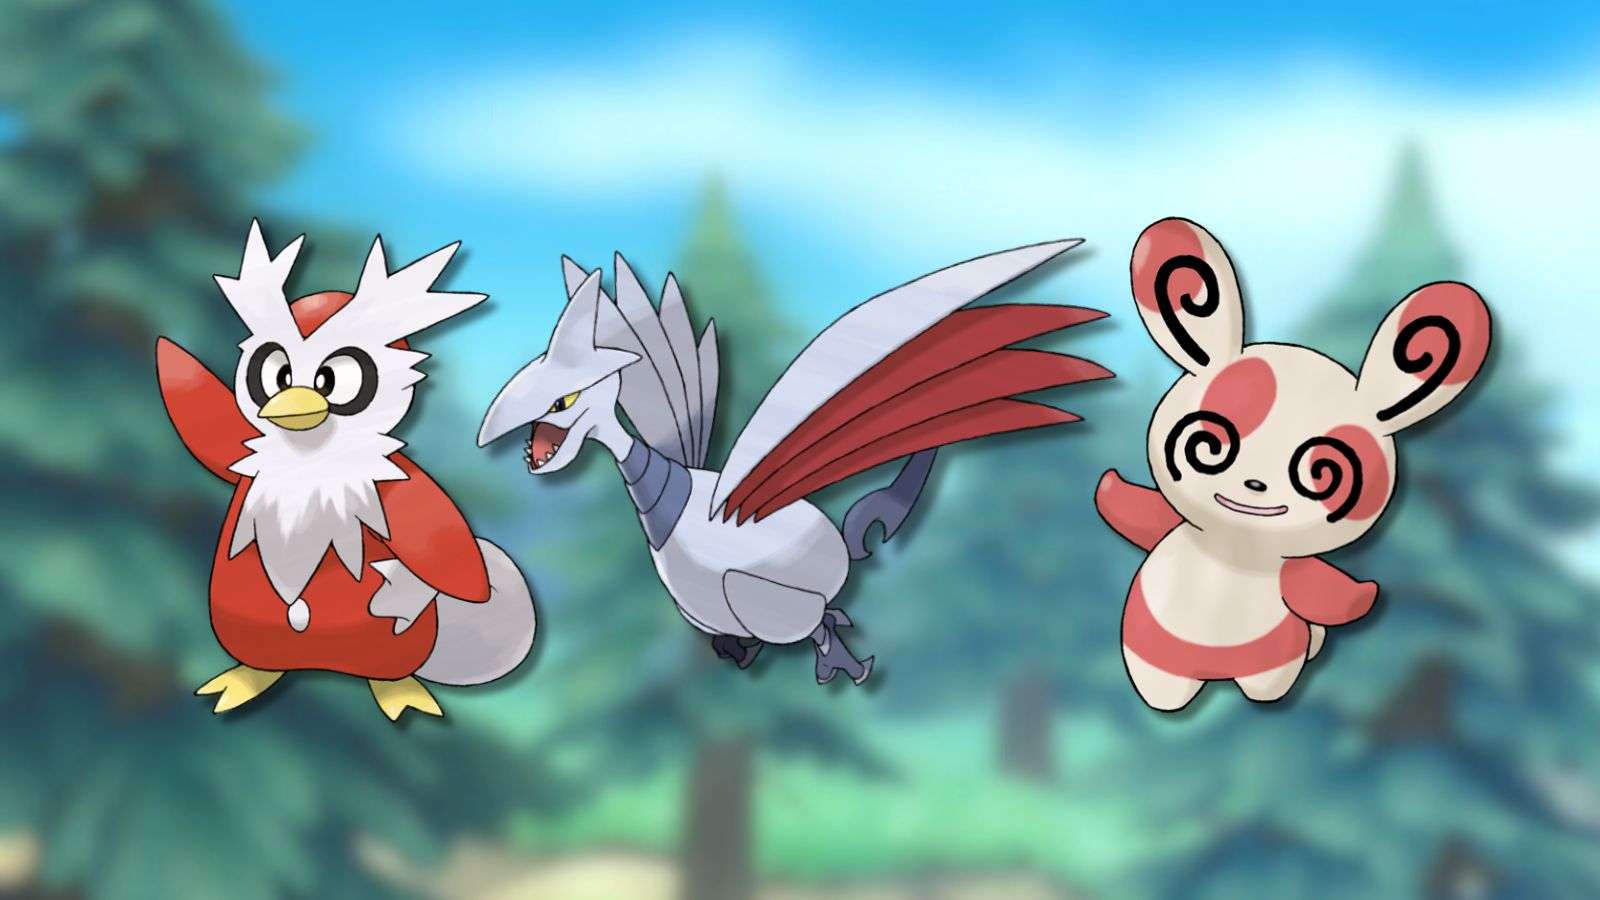 Delibird, Skarmory, and Spinda with Pokemon BDSP background